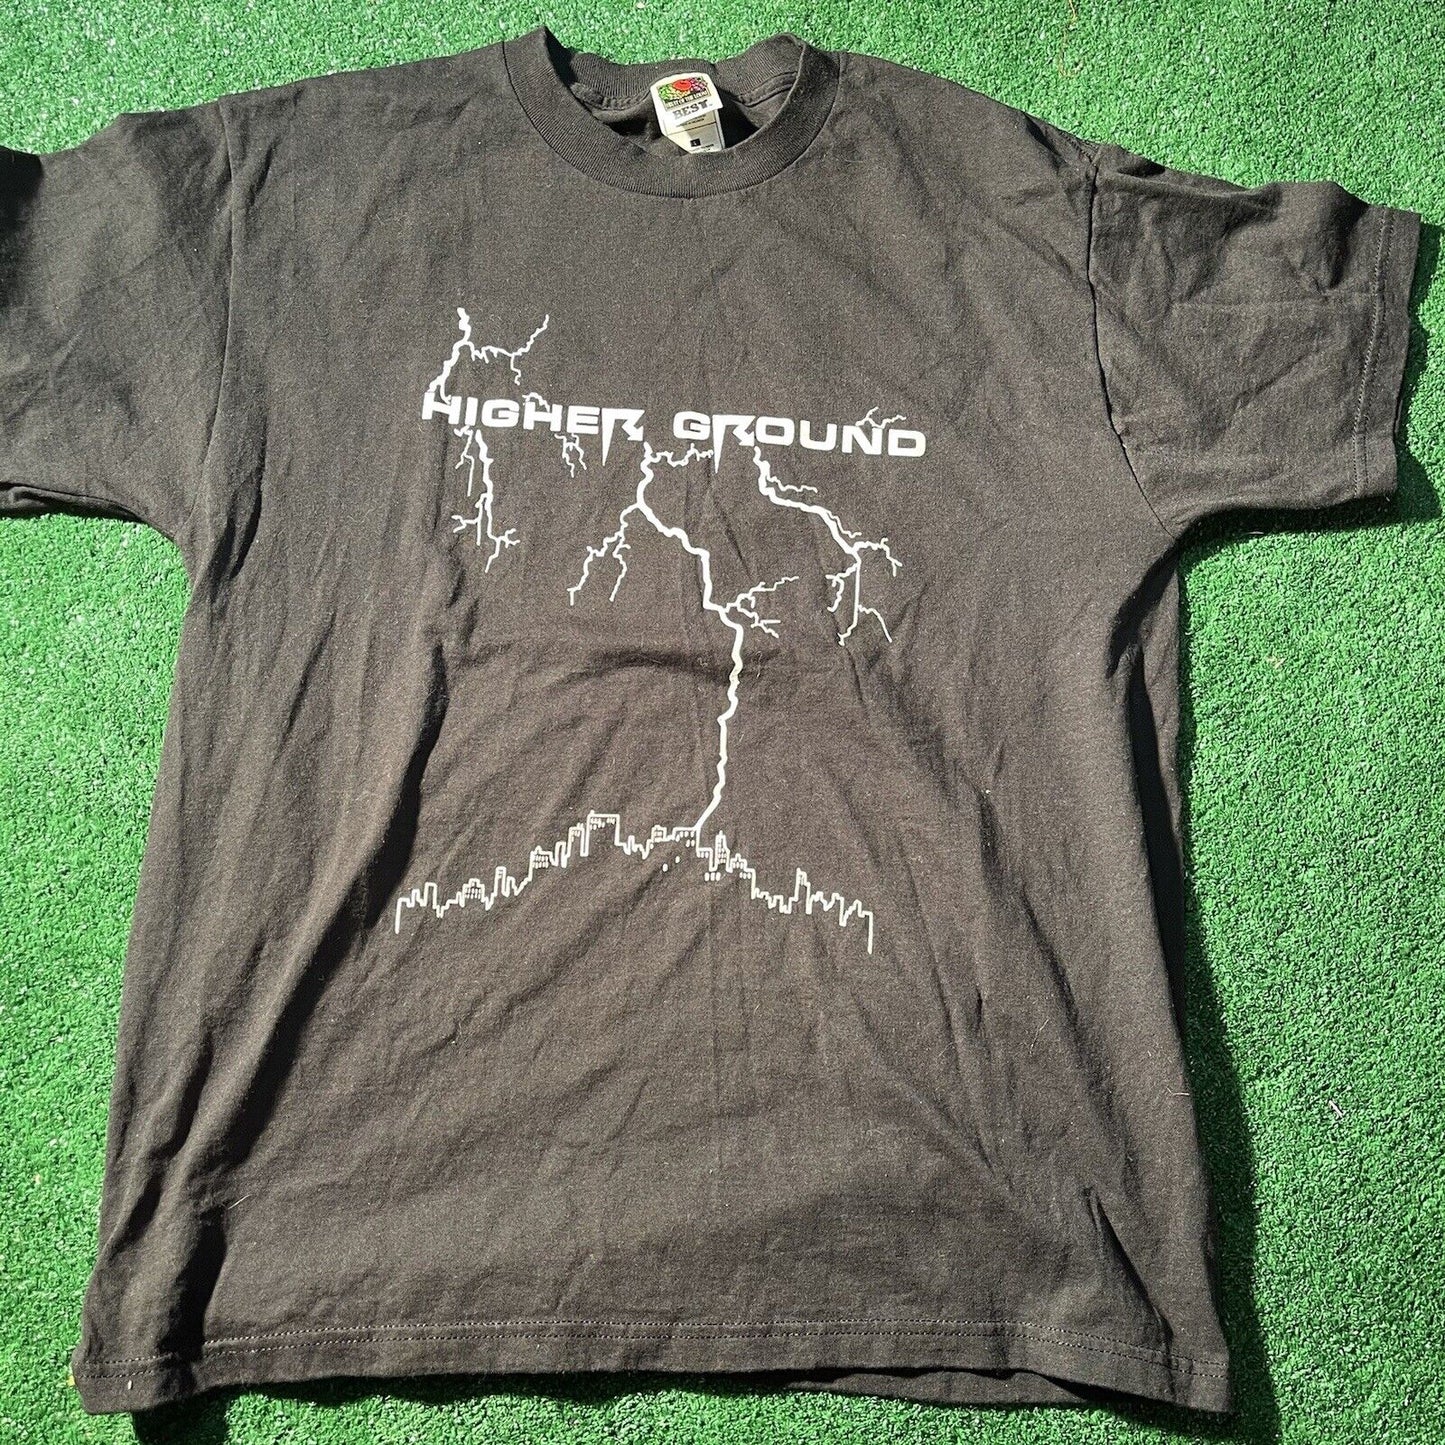 Vintage Higher Ground “ Youve Been Grounded” Shirt Size Large